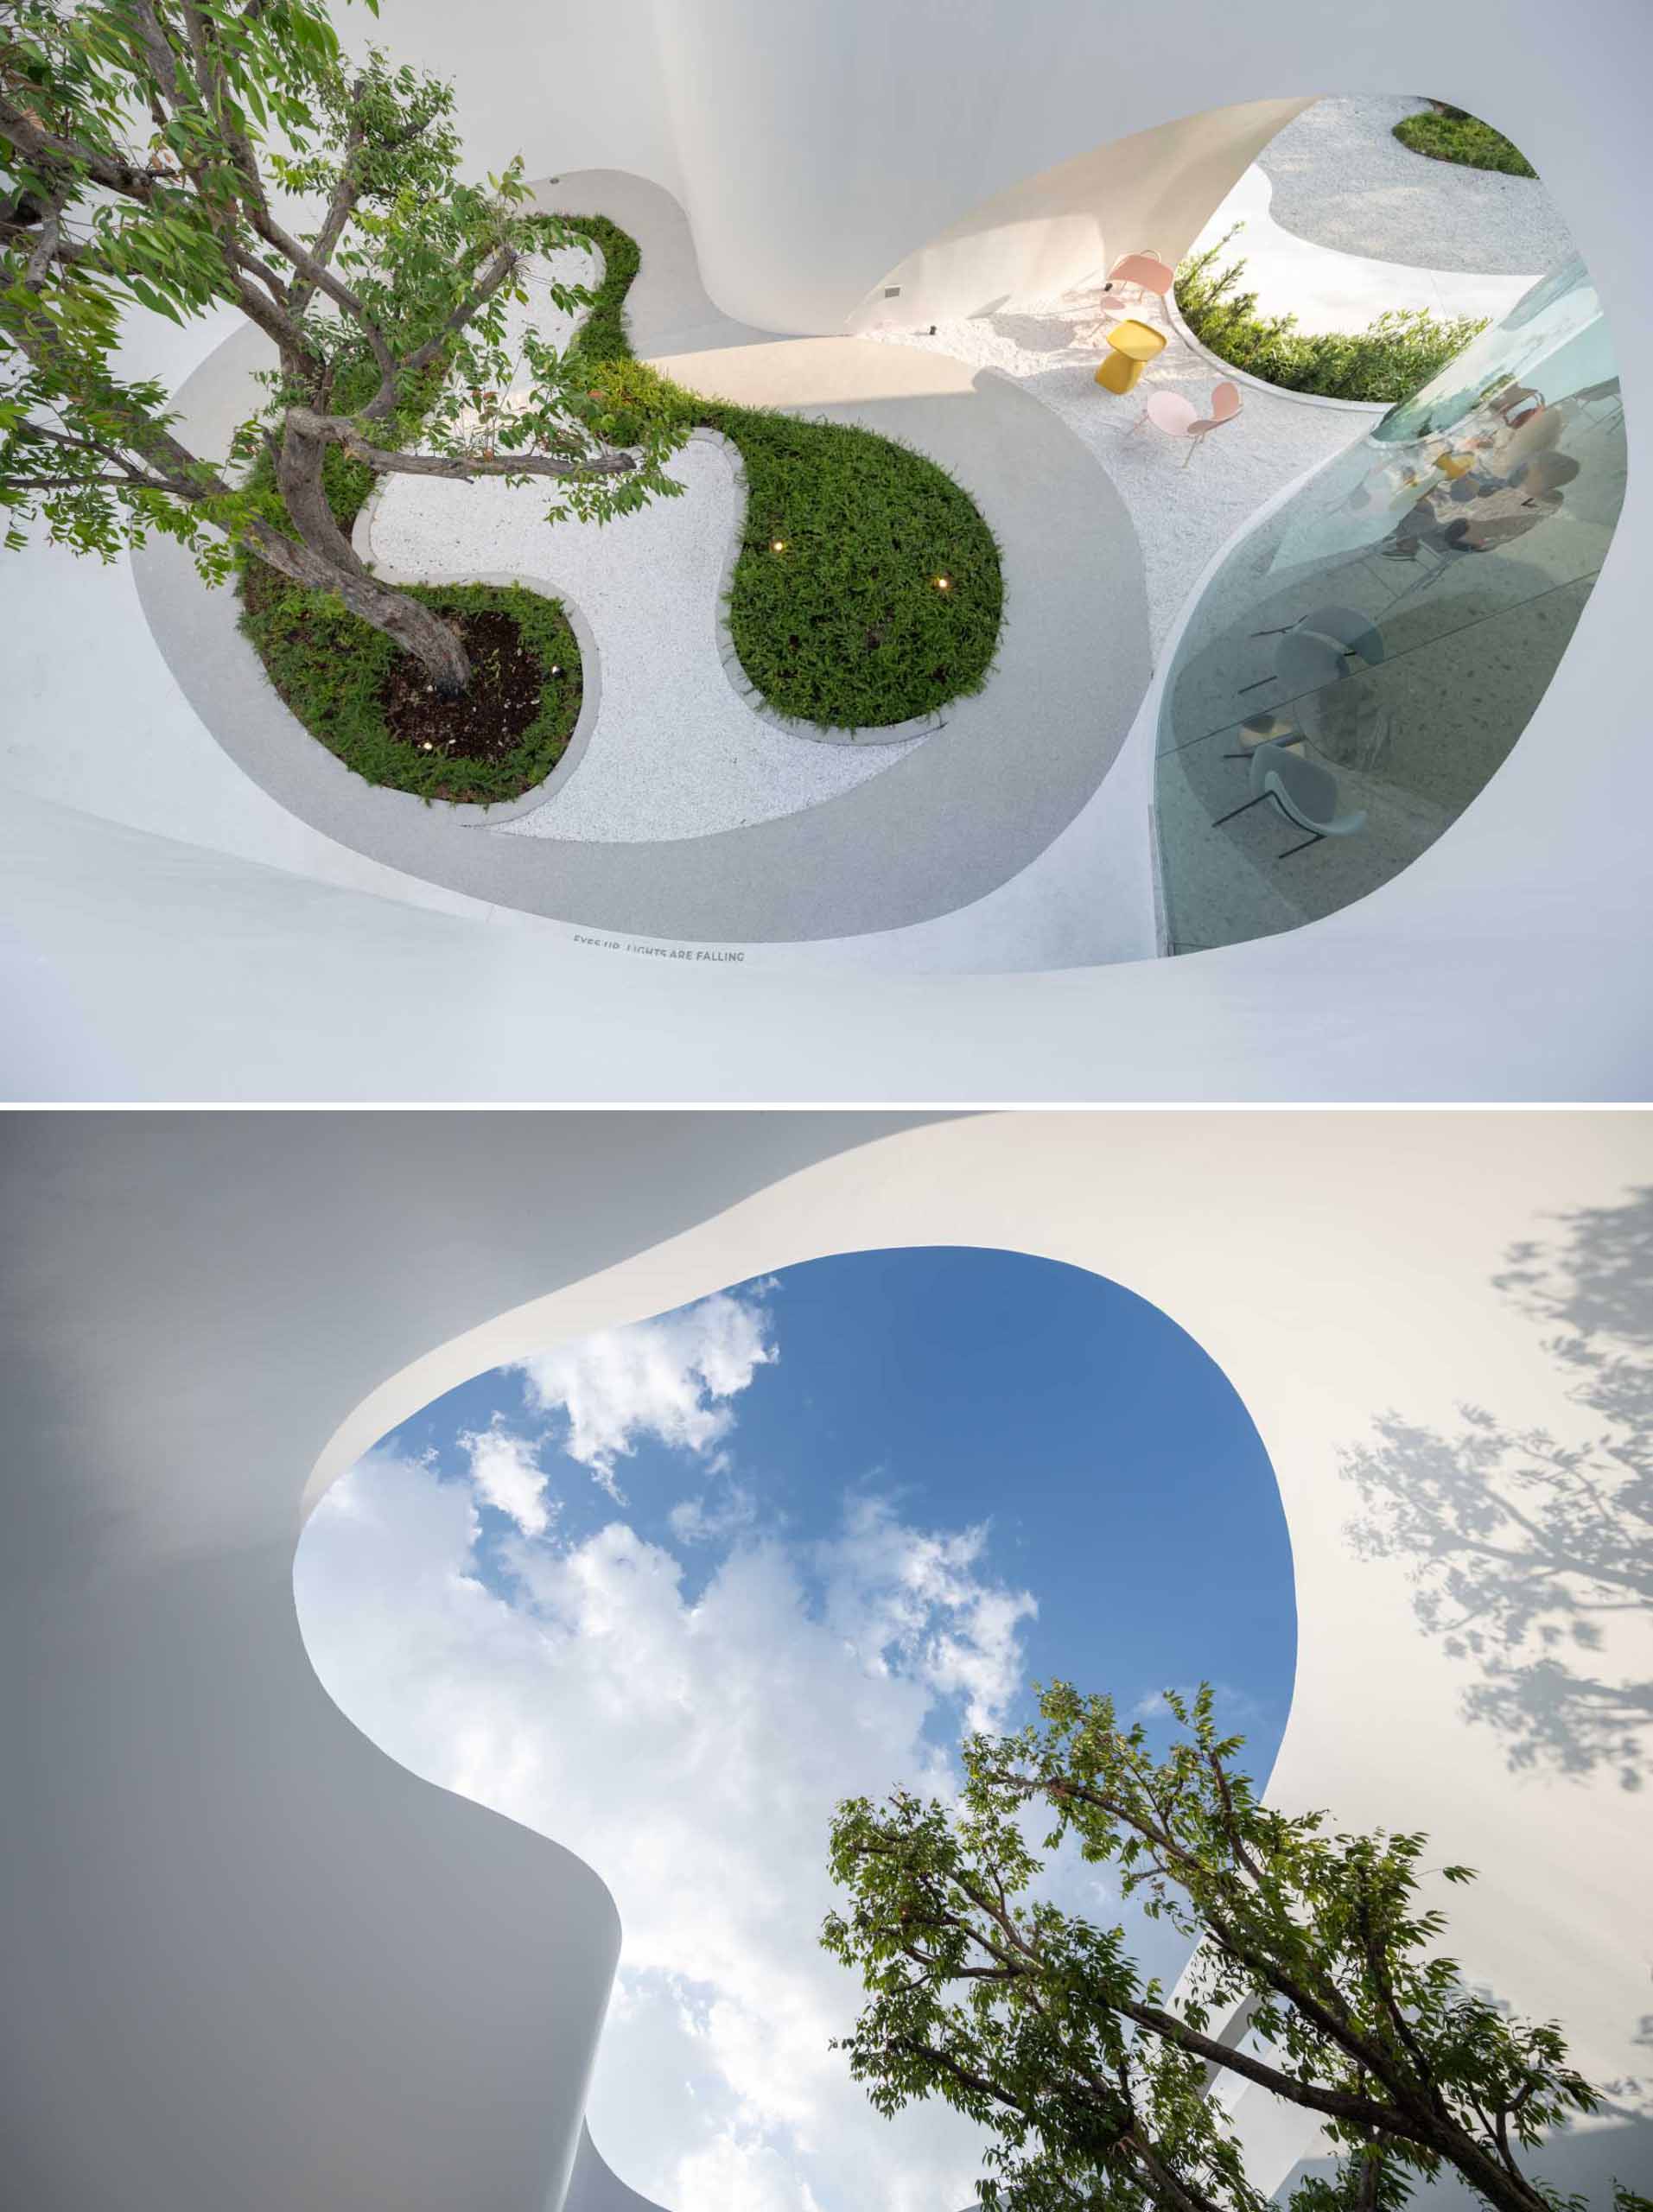 A coffee shop courtyard, open to the elements, includes a small garden with a tree, that draws your eye upward to the sky.